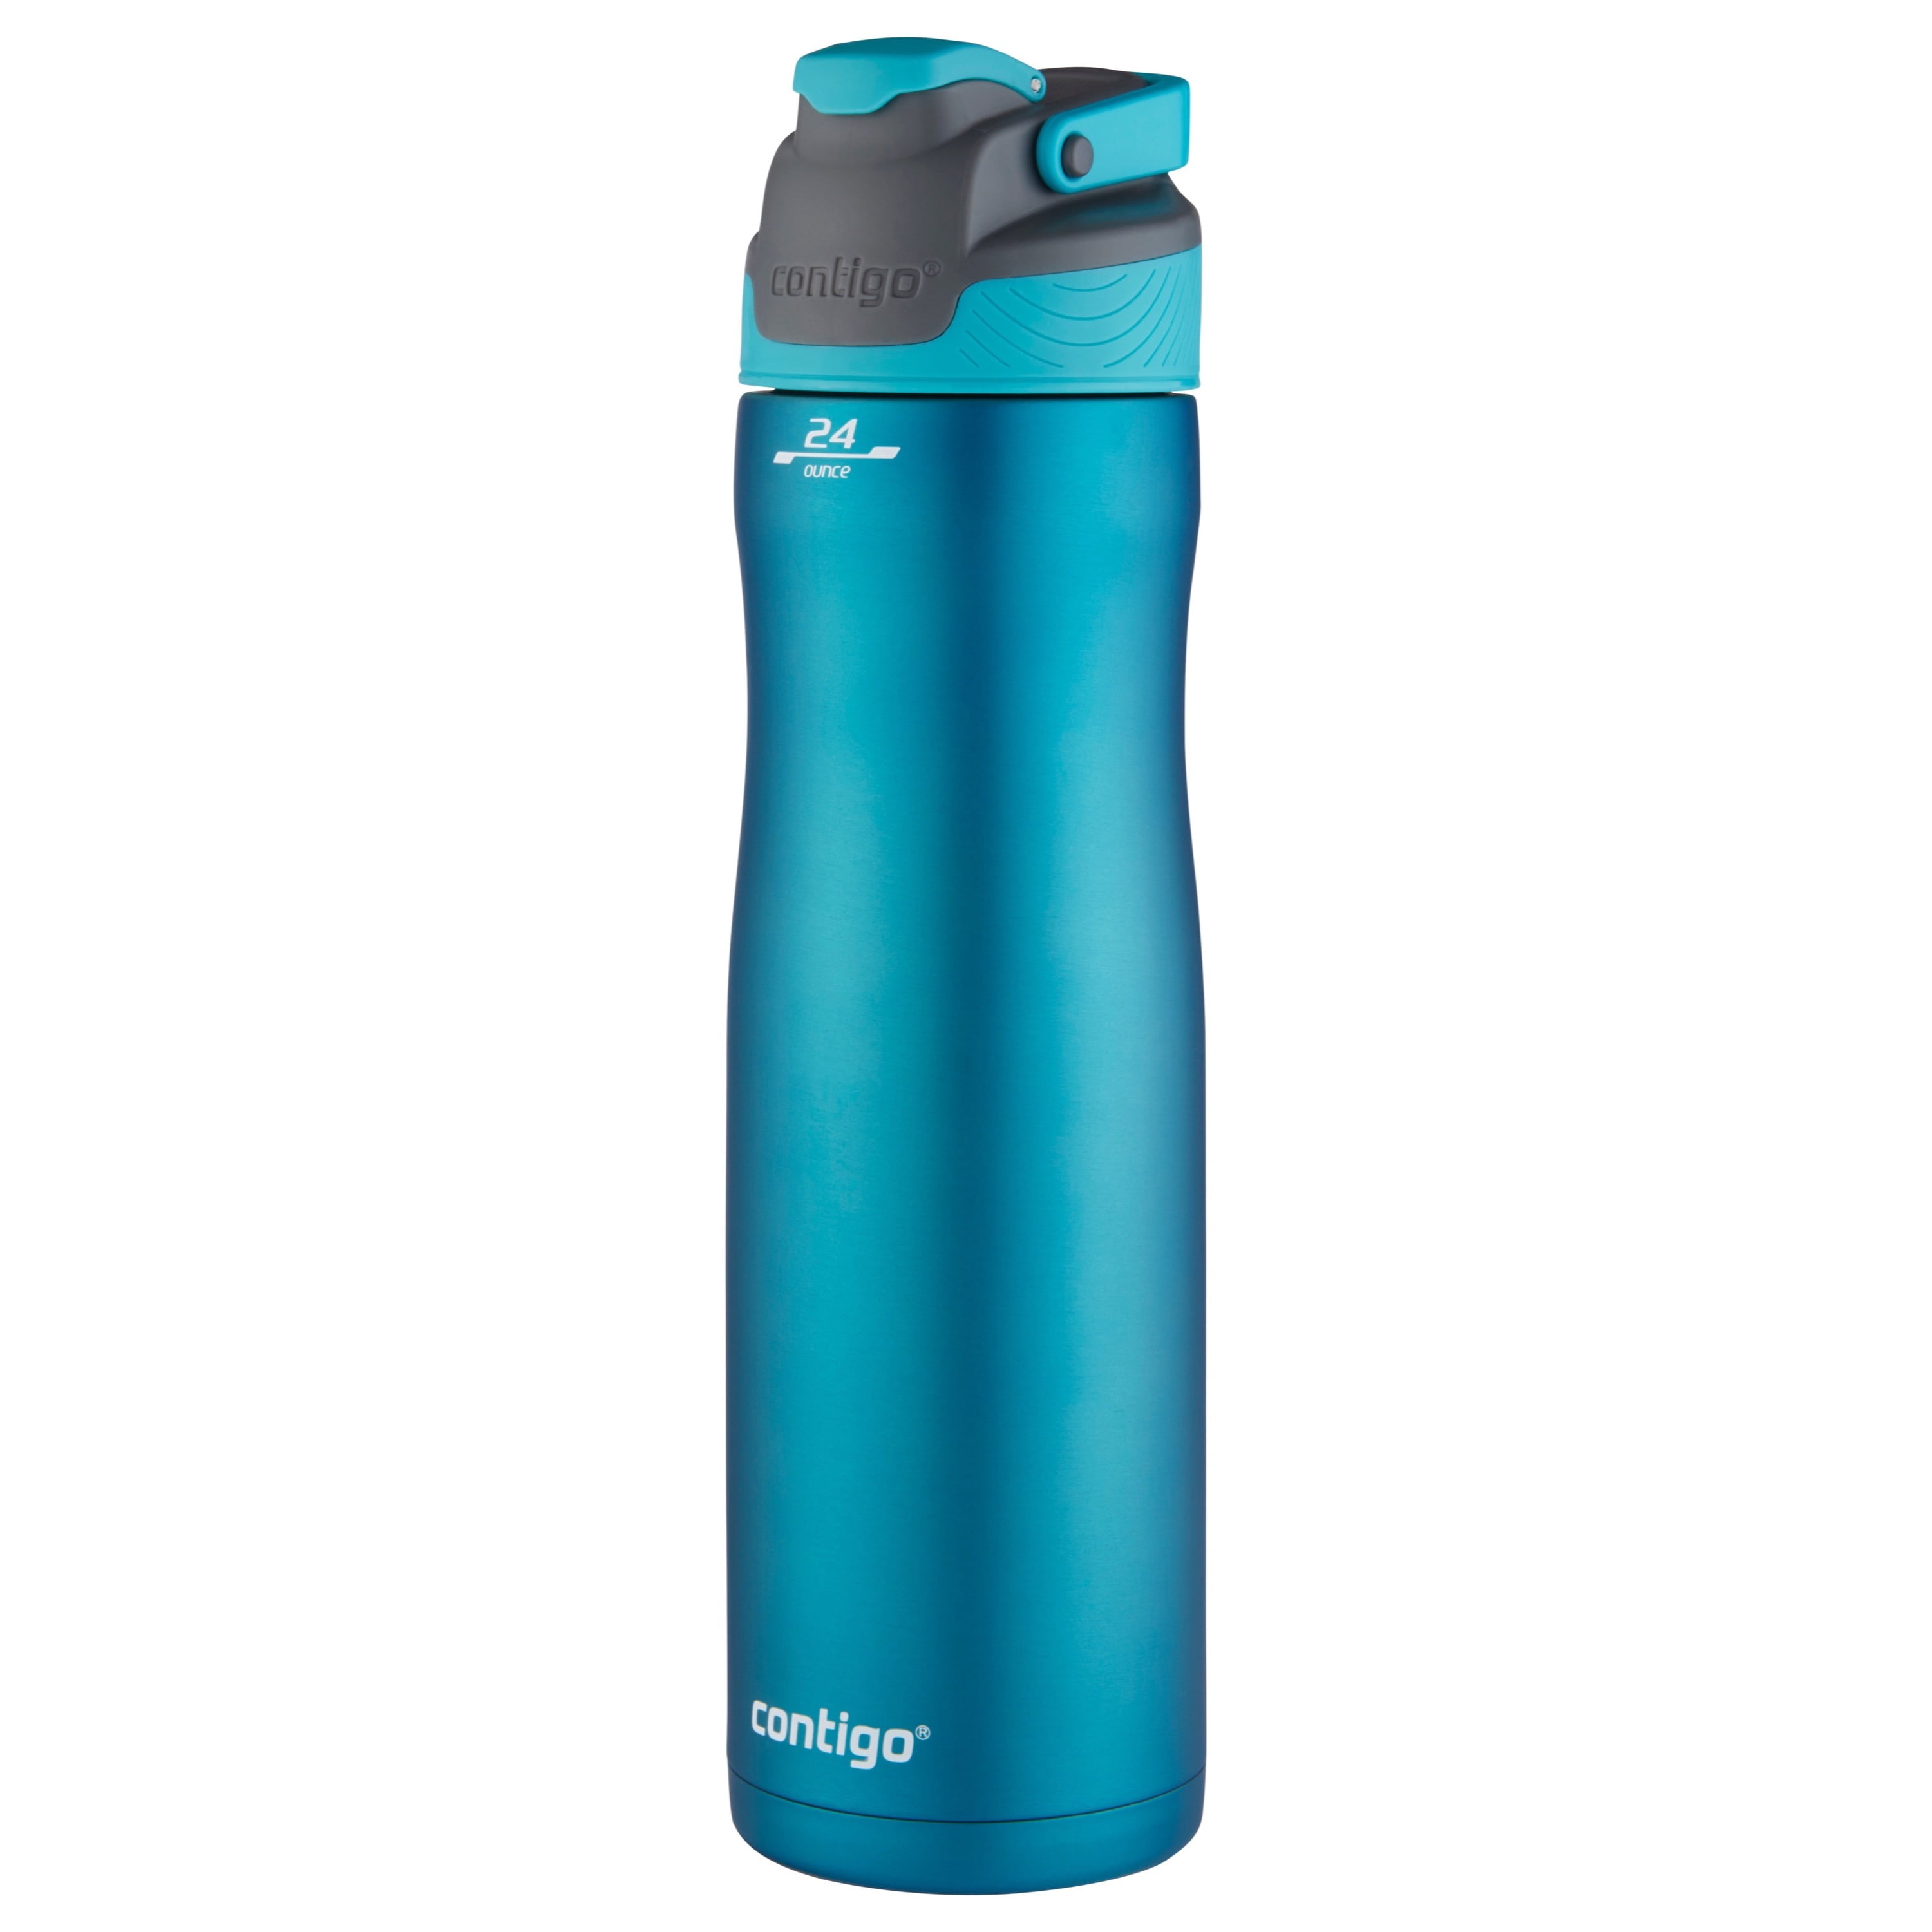  Contigo AUTOSEAL Chill Stainless Steel Water Bottle, 24 oz.,  Very Berry : Sports & Outdoors